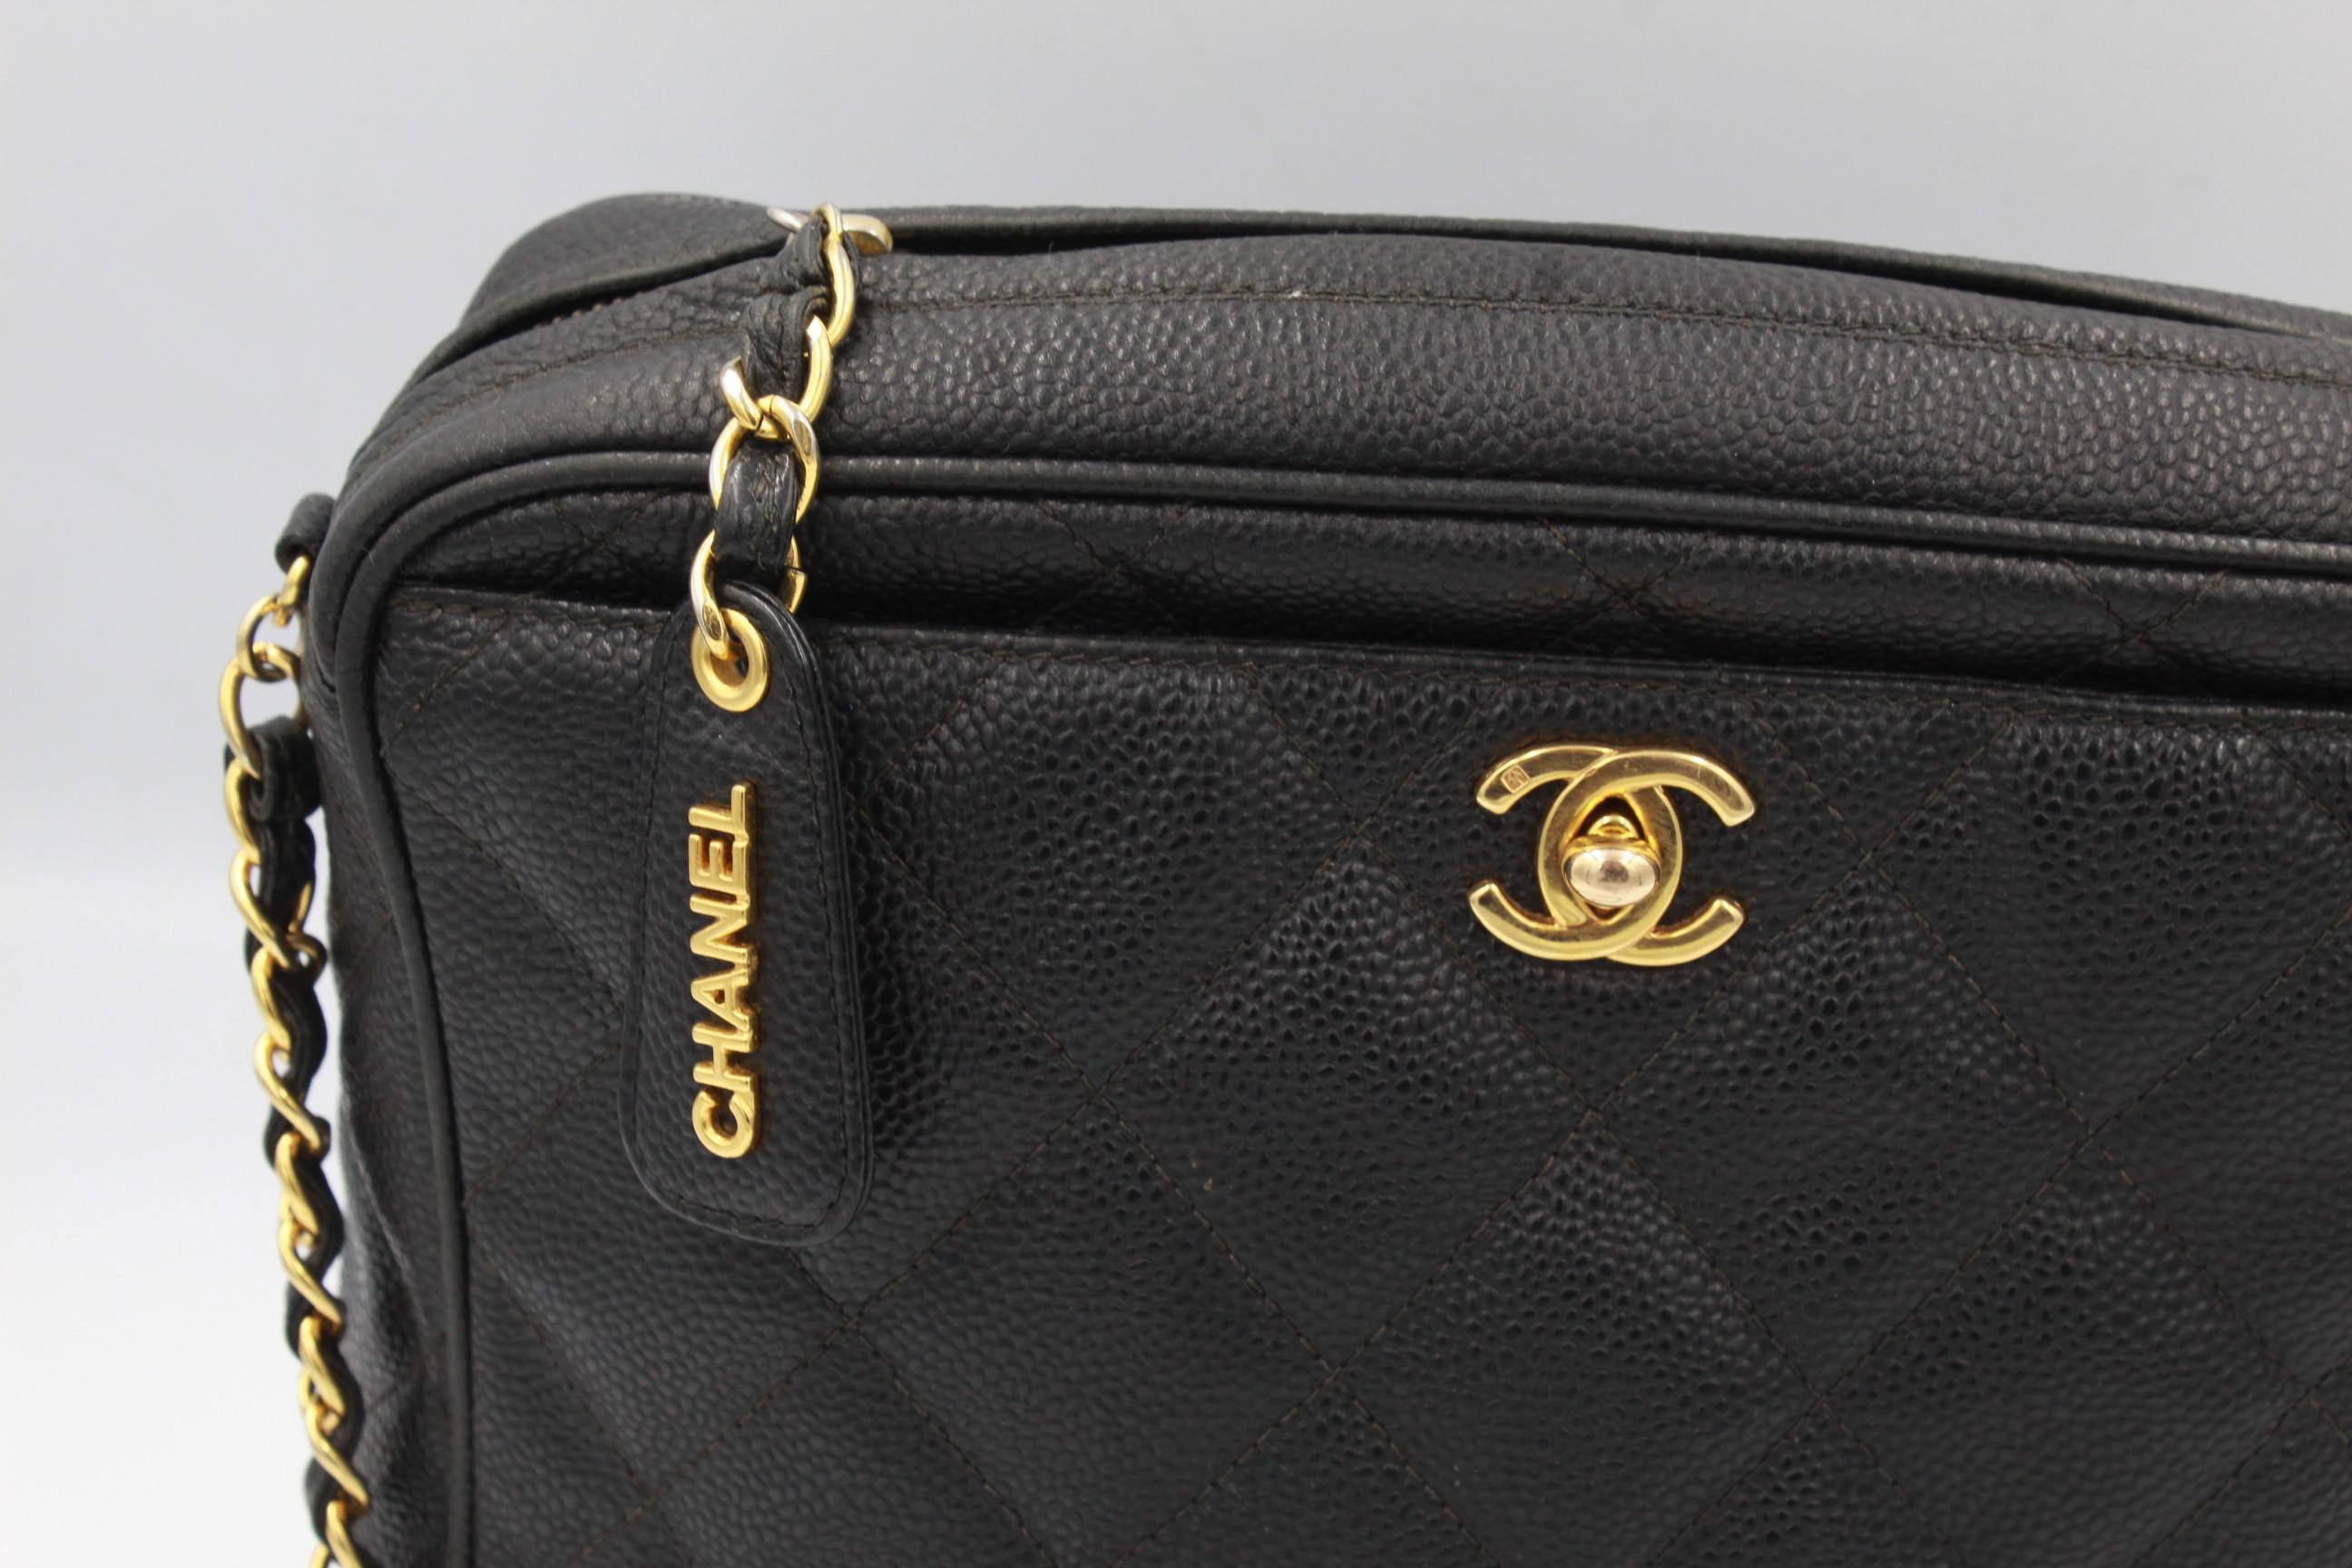 Vintage Chanel black bag in grained leather and golden hardware.

used, good vintage condition. Leathe rin good condition outised ( no signs of wear in corners)
Hardware in good condition (light loose of the goolden in the part of the zip)
Hologram